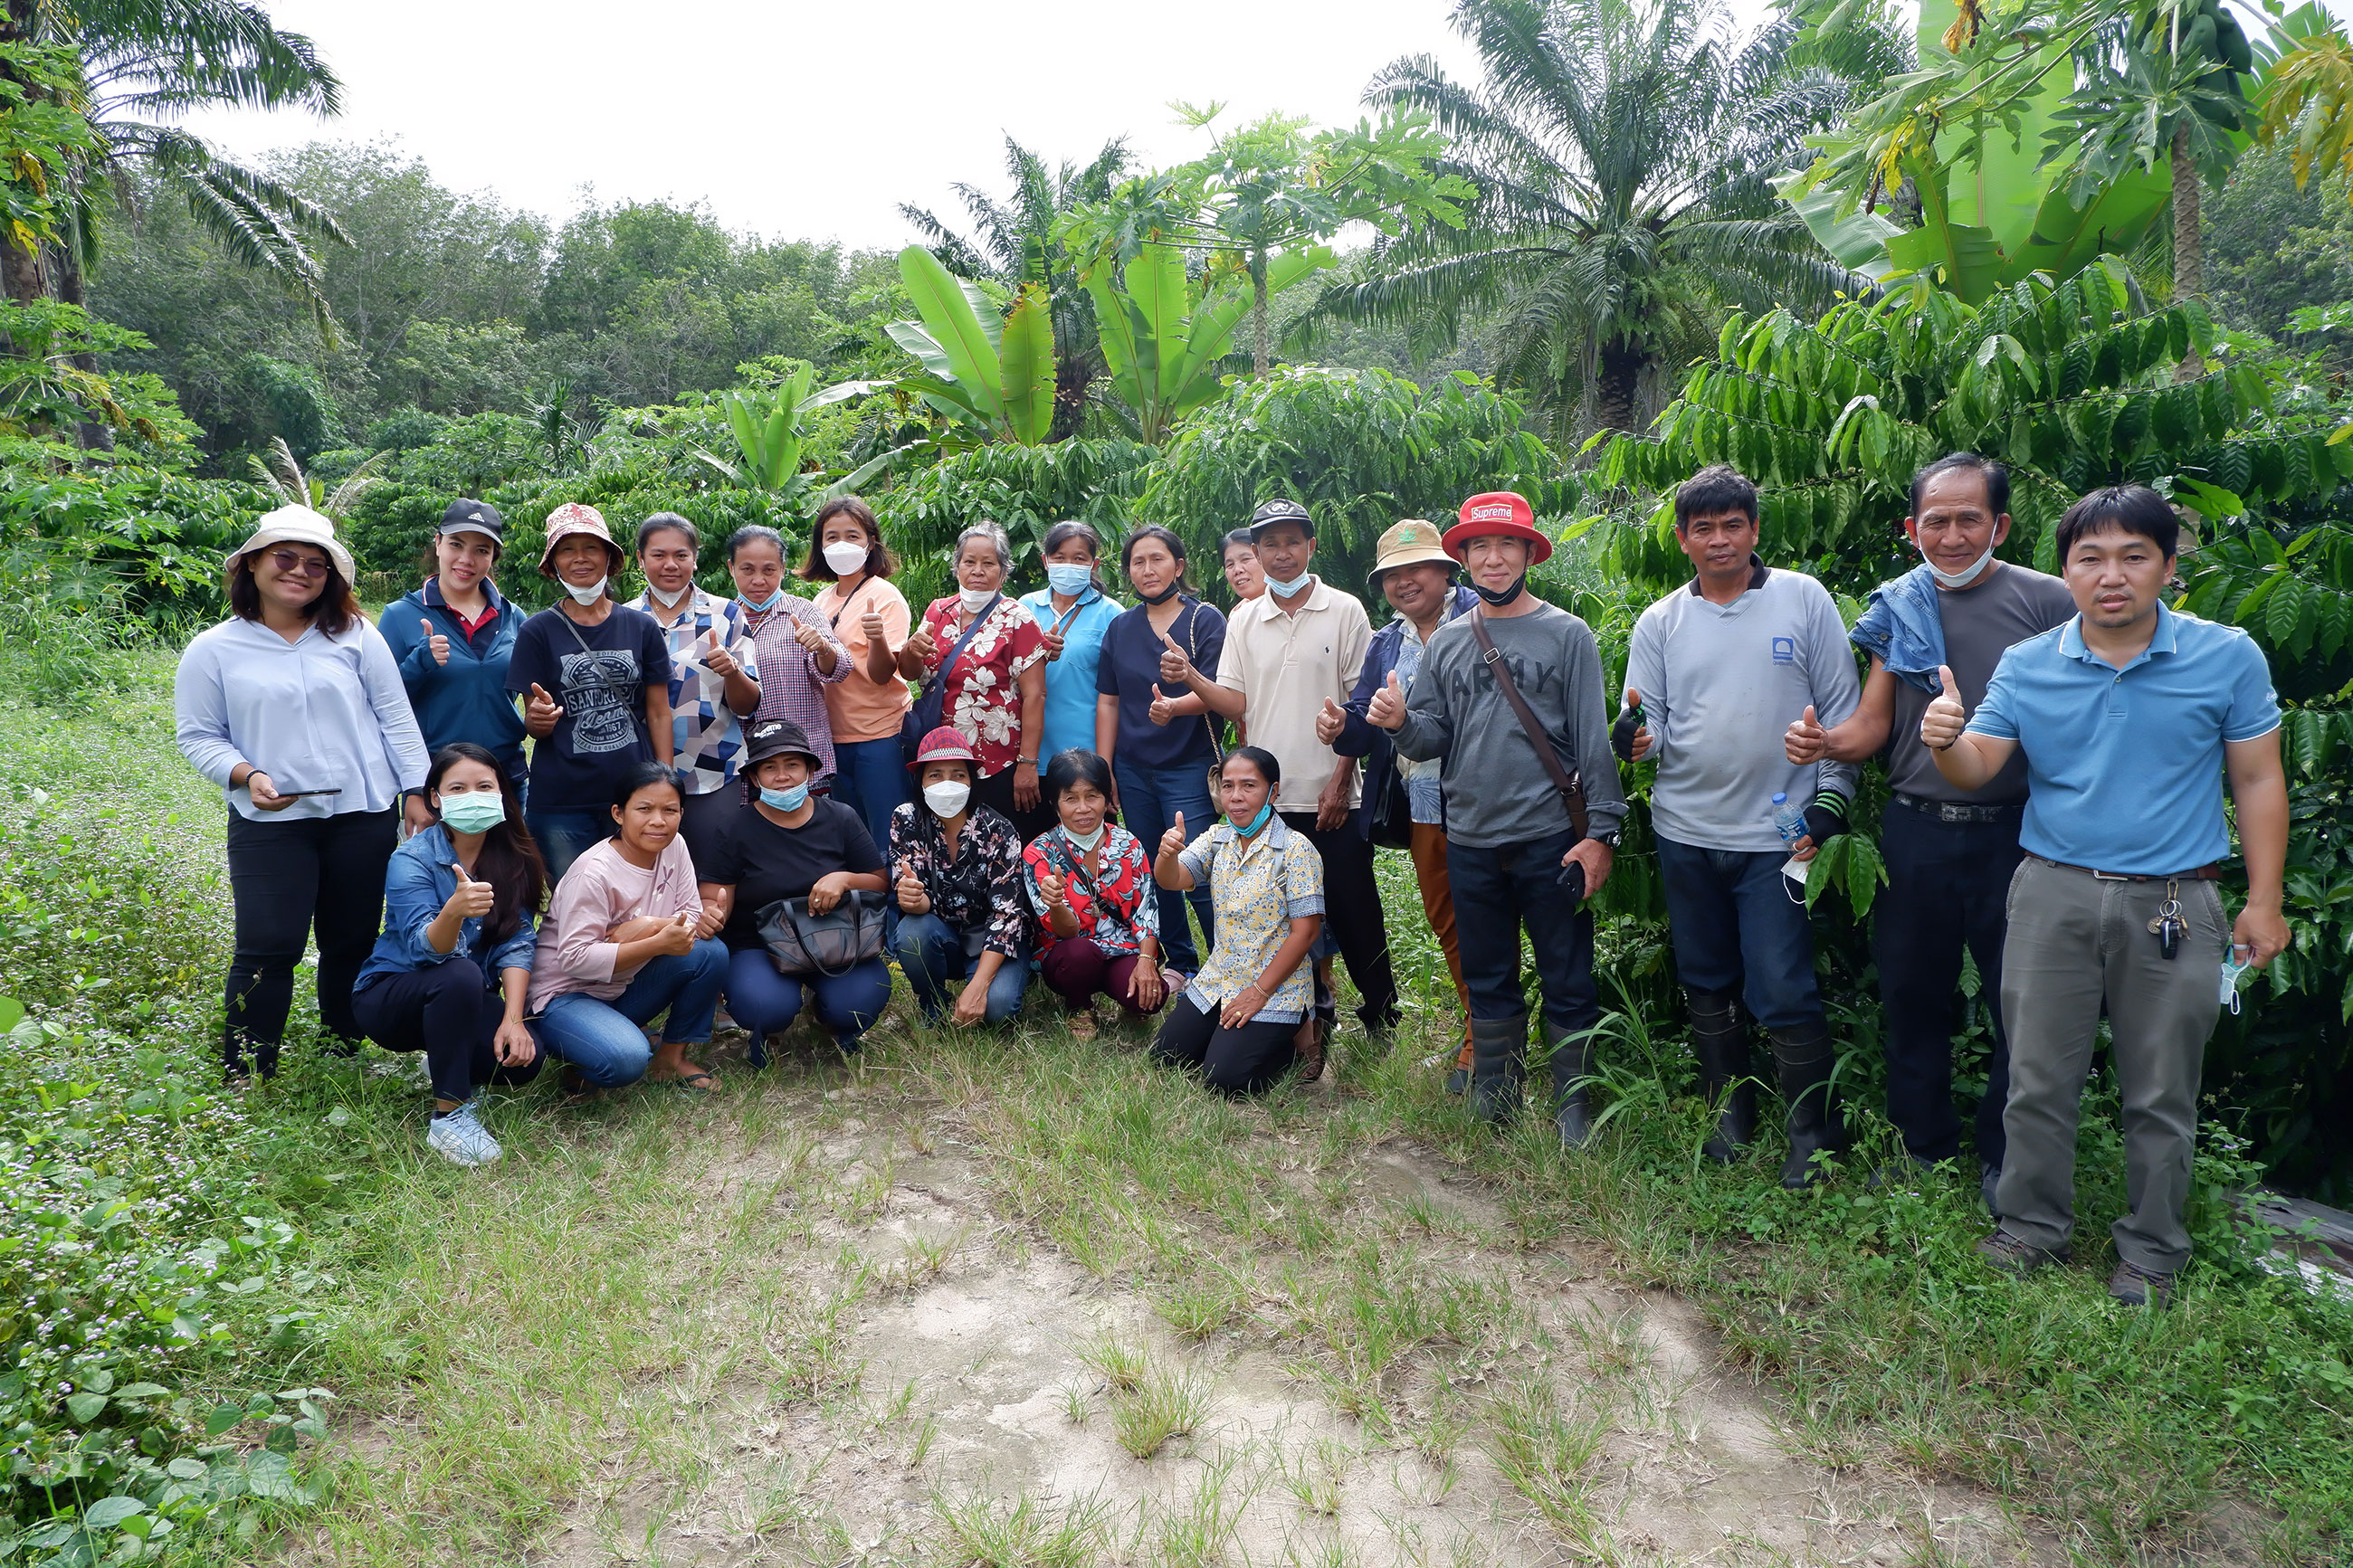 Farmer members from Huai Nai Roi Community Coffee Farmer Group, Coffee+ Project team, and Mr. Pichet Niambandit, owner of the demonstration plot, pose for a group photo.